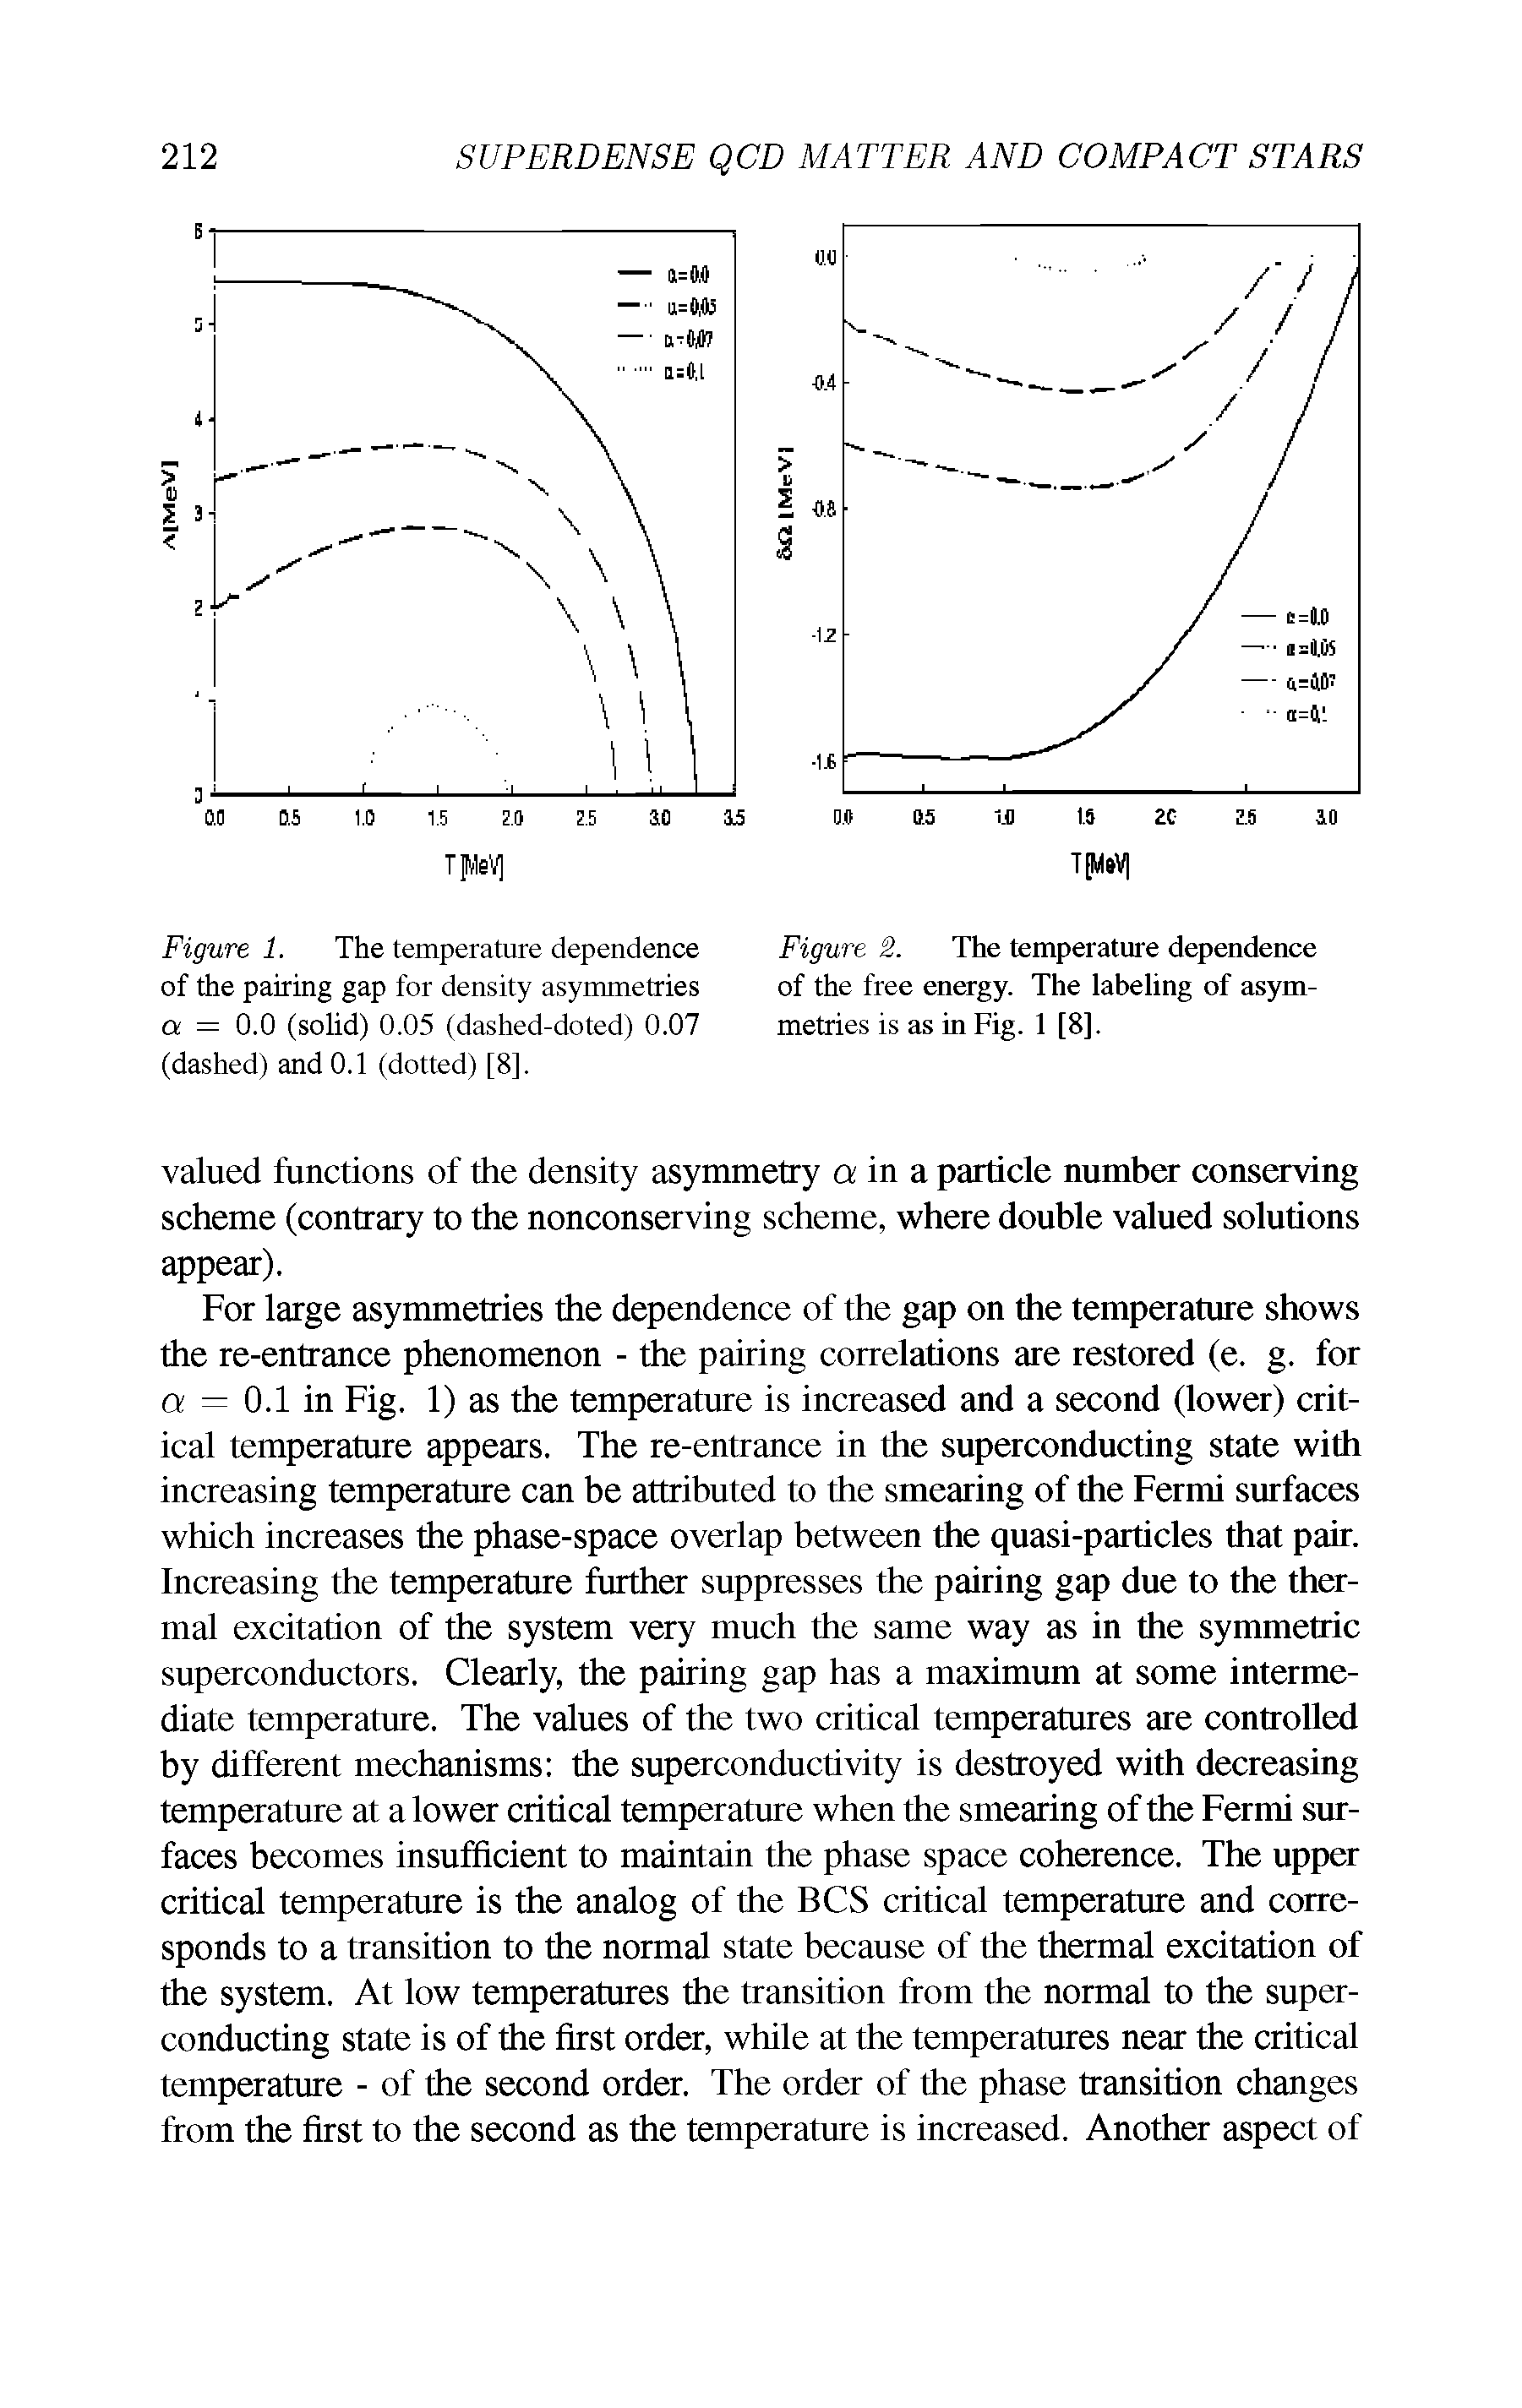 Figure 2. The temperature dependence of the free energy. The labeling of asymmetries is as in Fig. 1 [8].